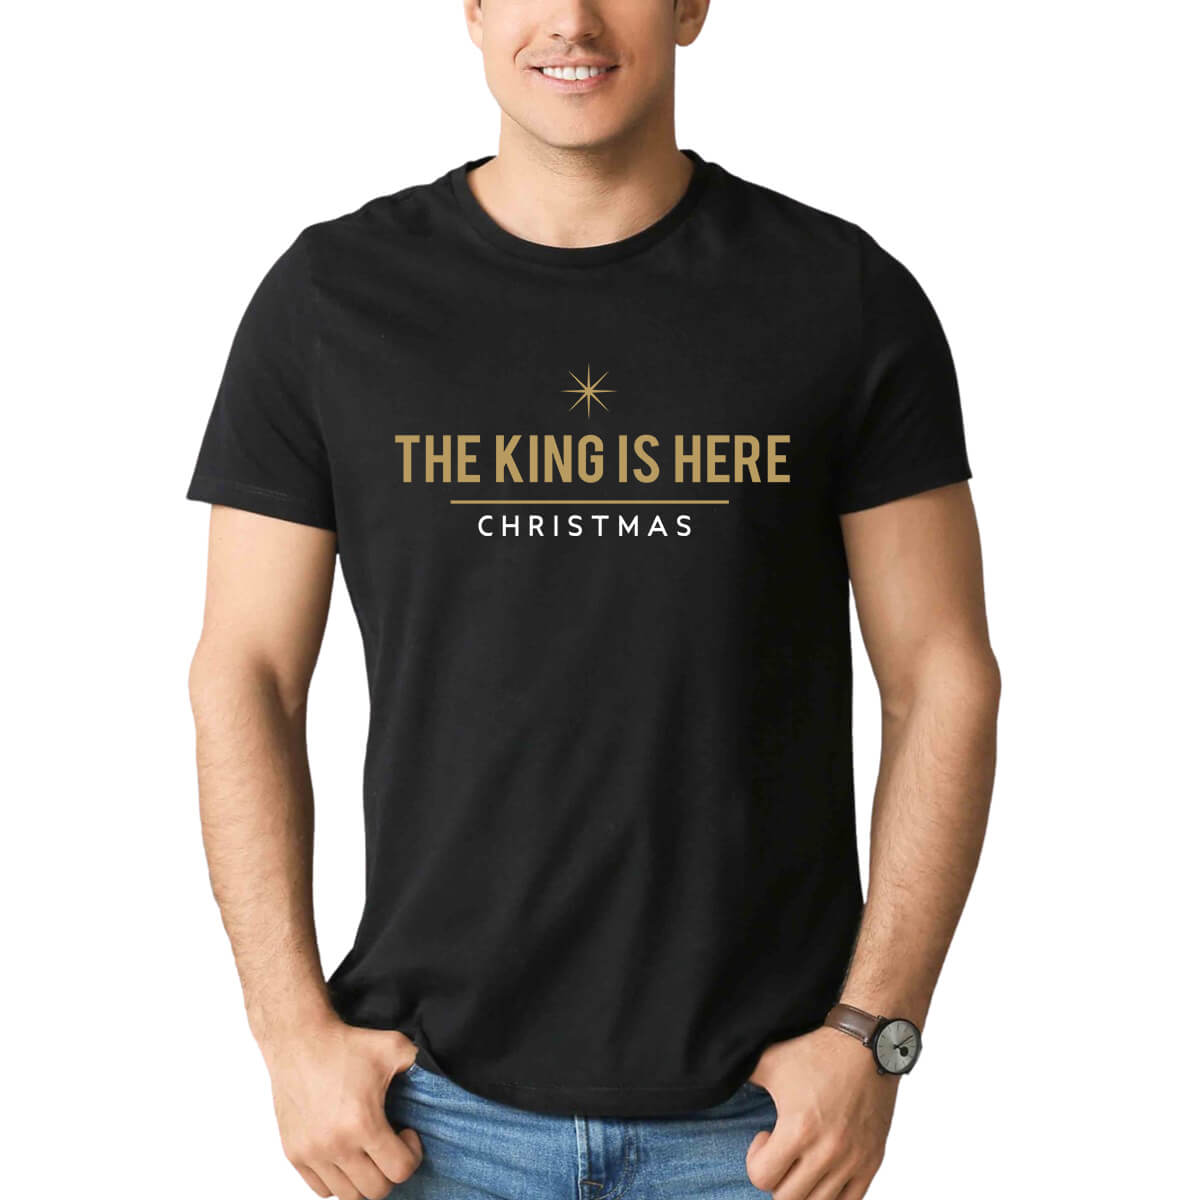 The King Is Here Christmas Men's T-Shirt